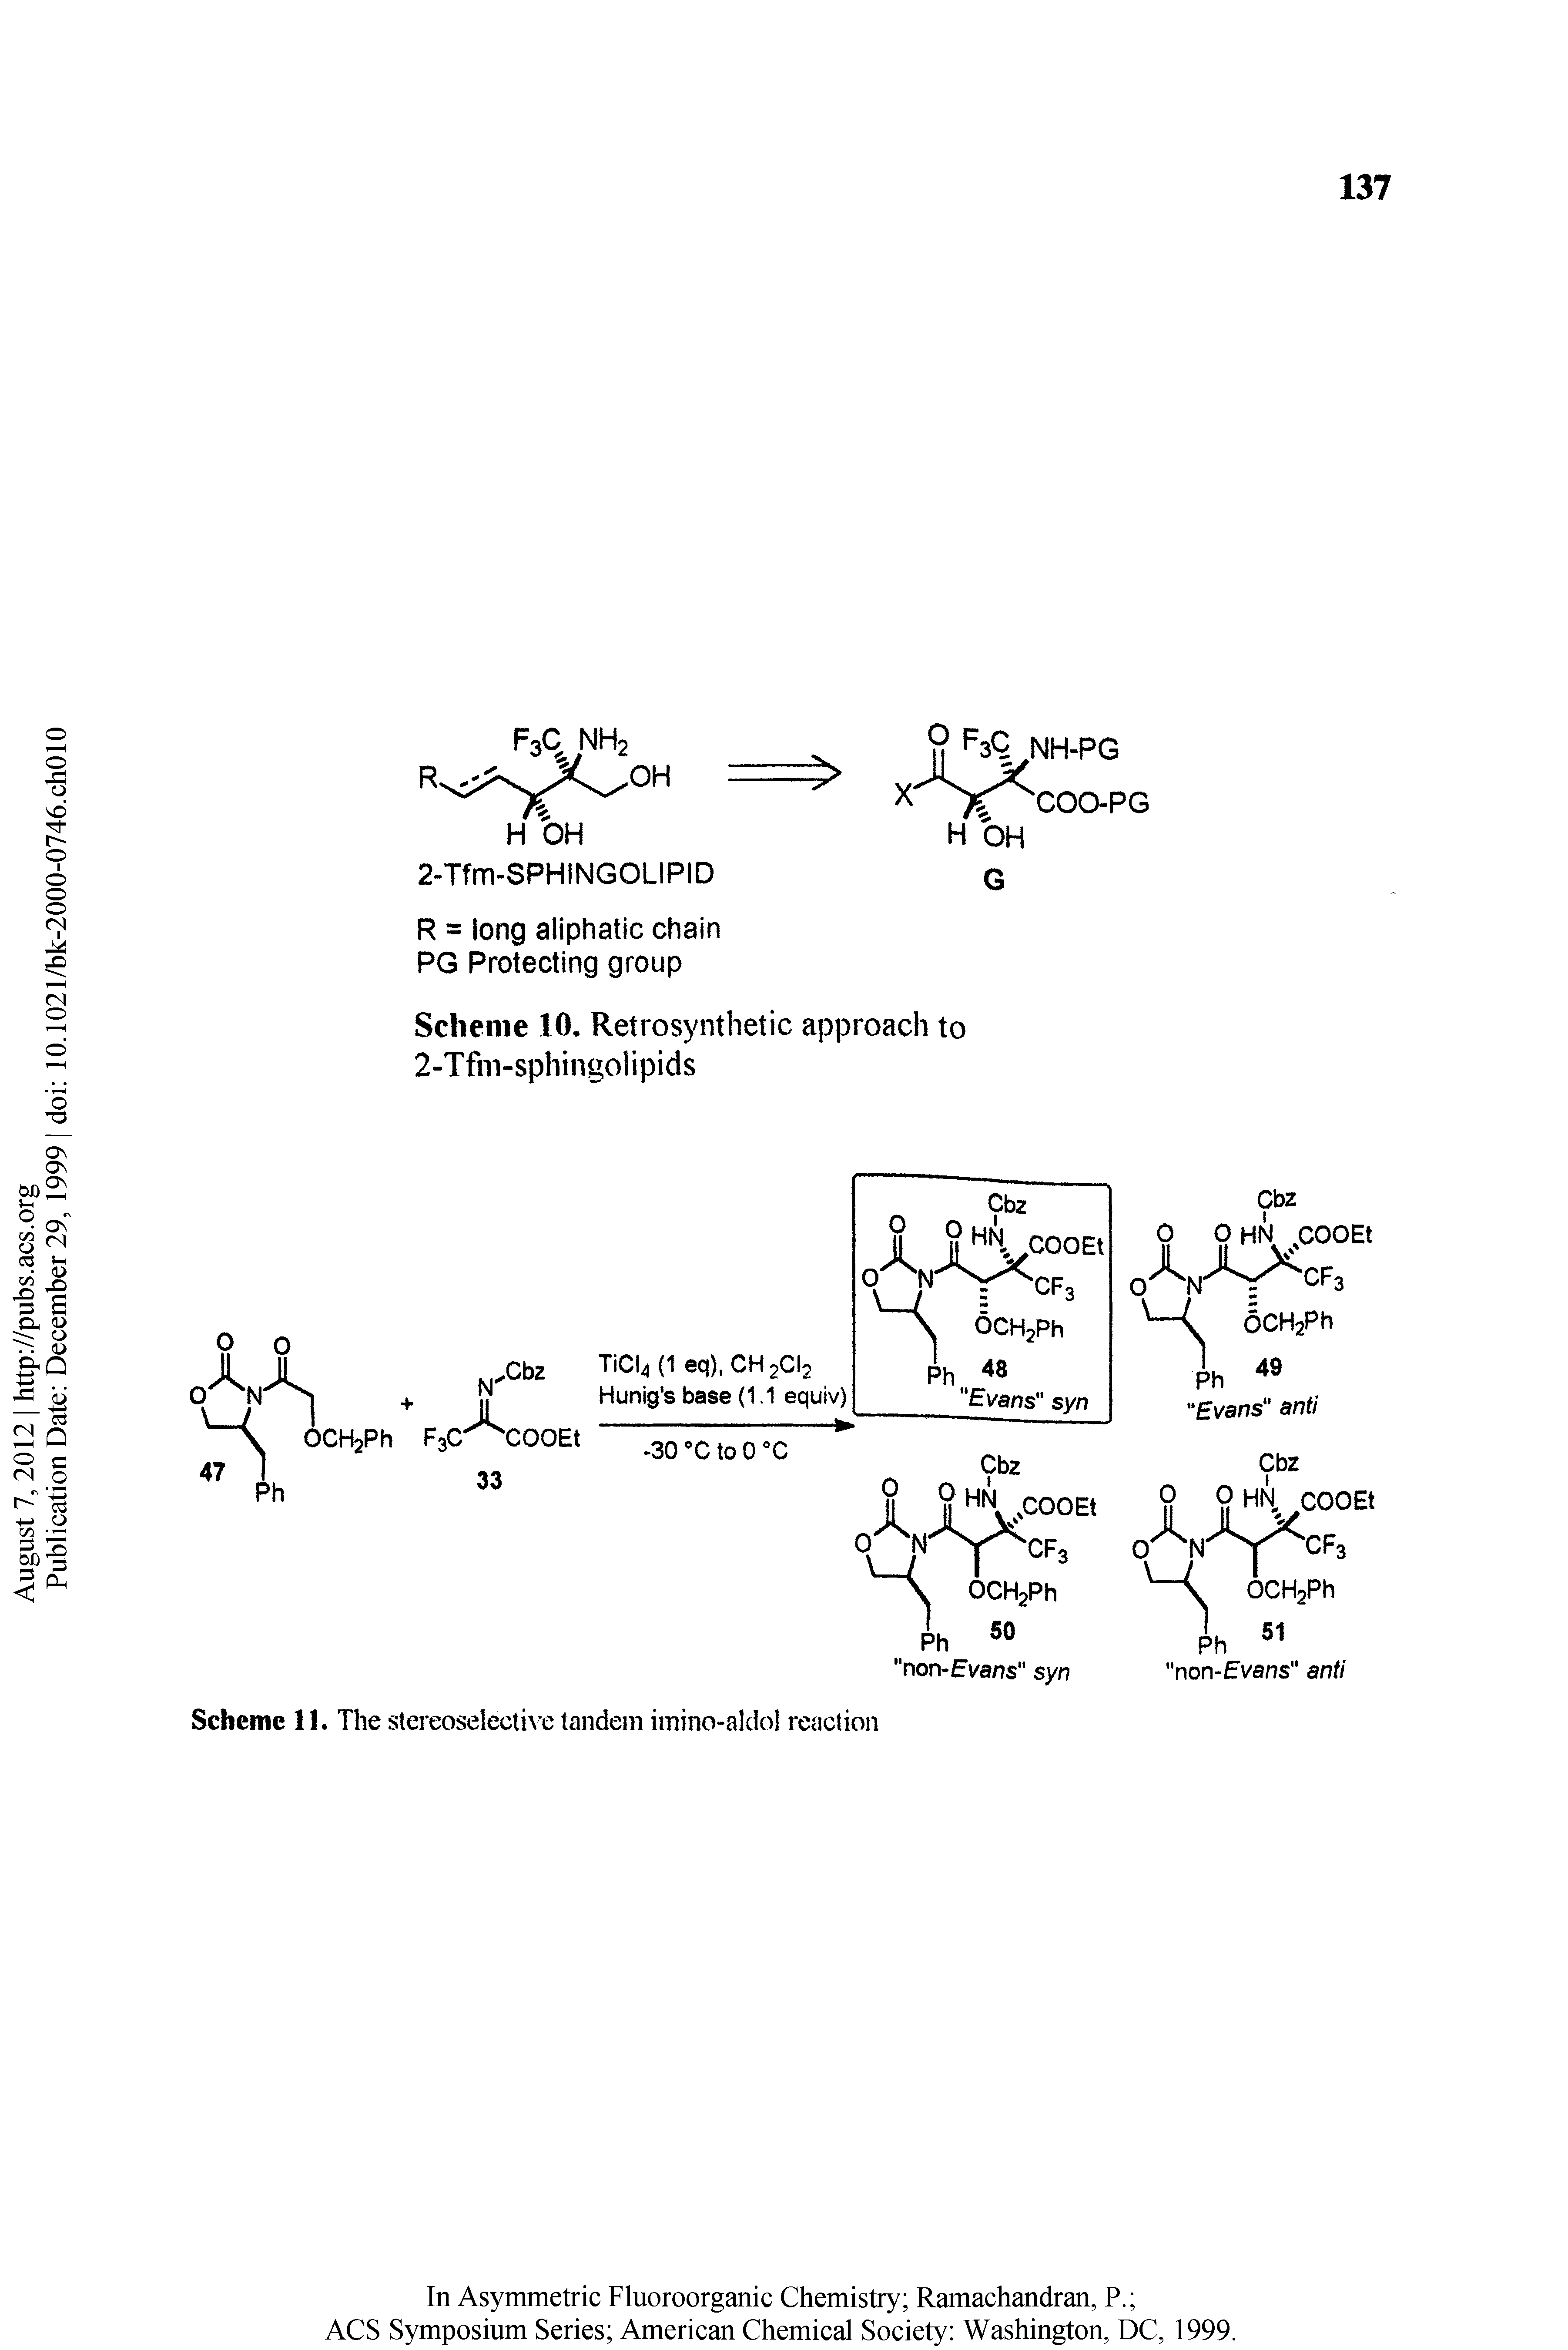 Scheme 11. The stereoselective tandem imino-aldol reaction...